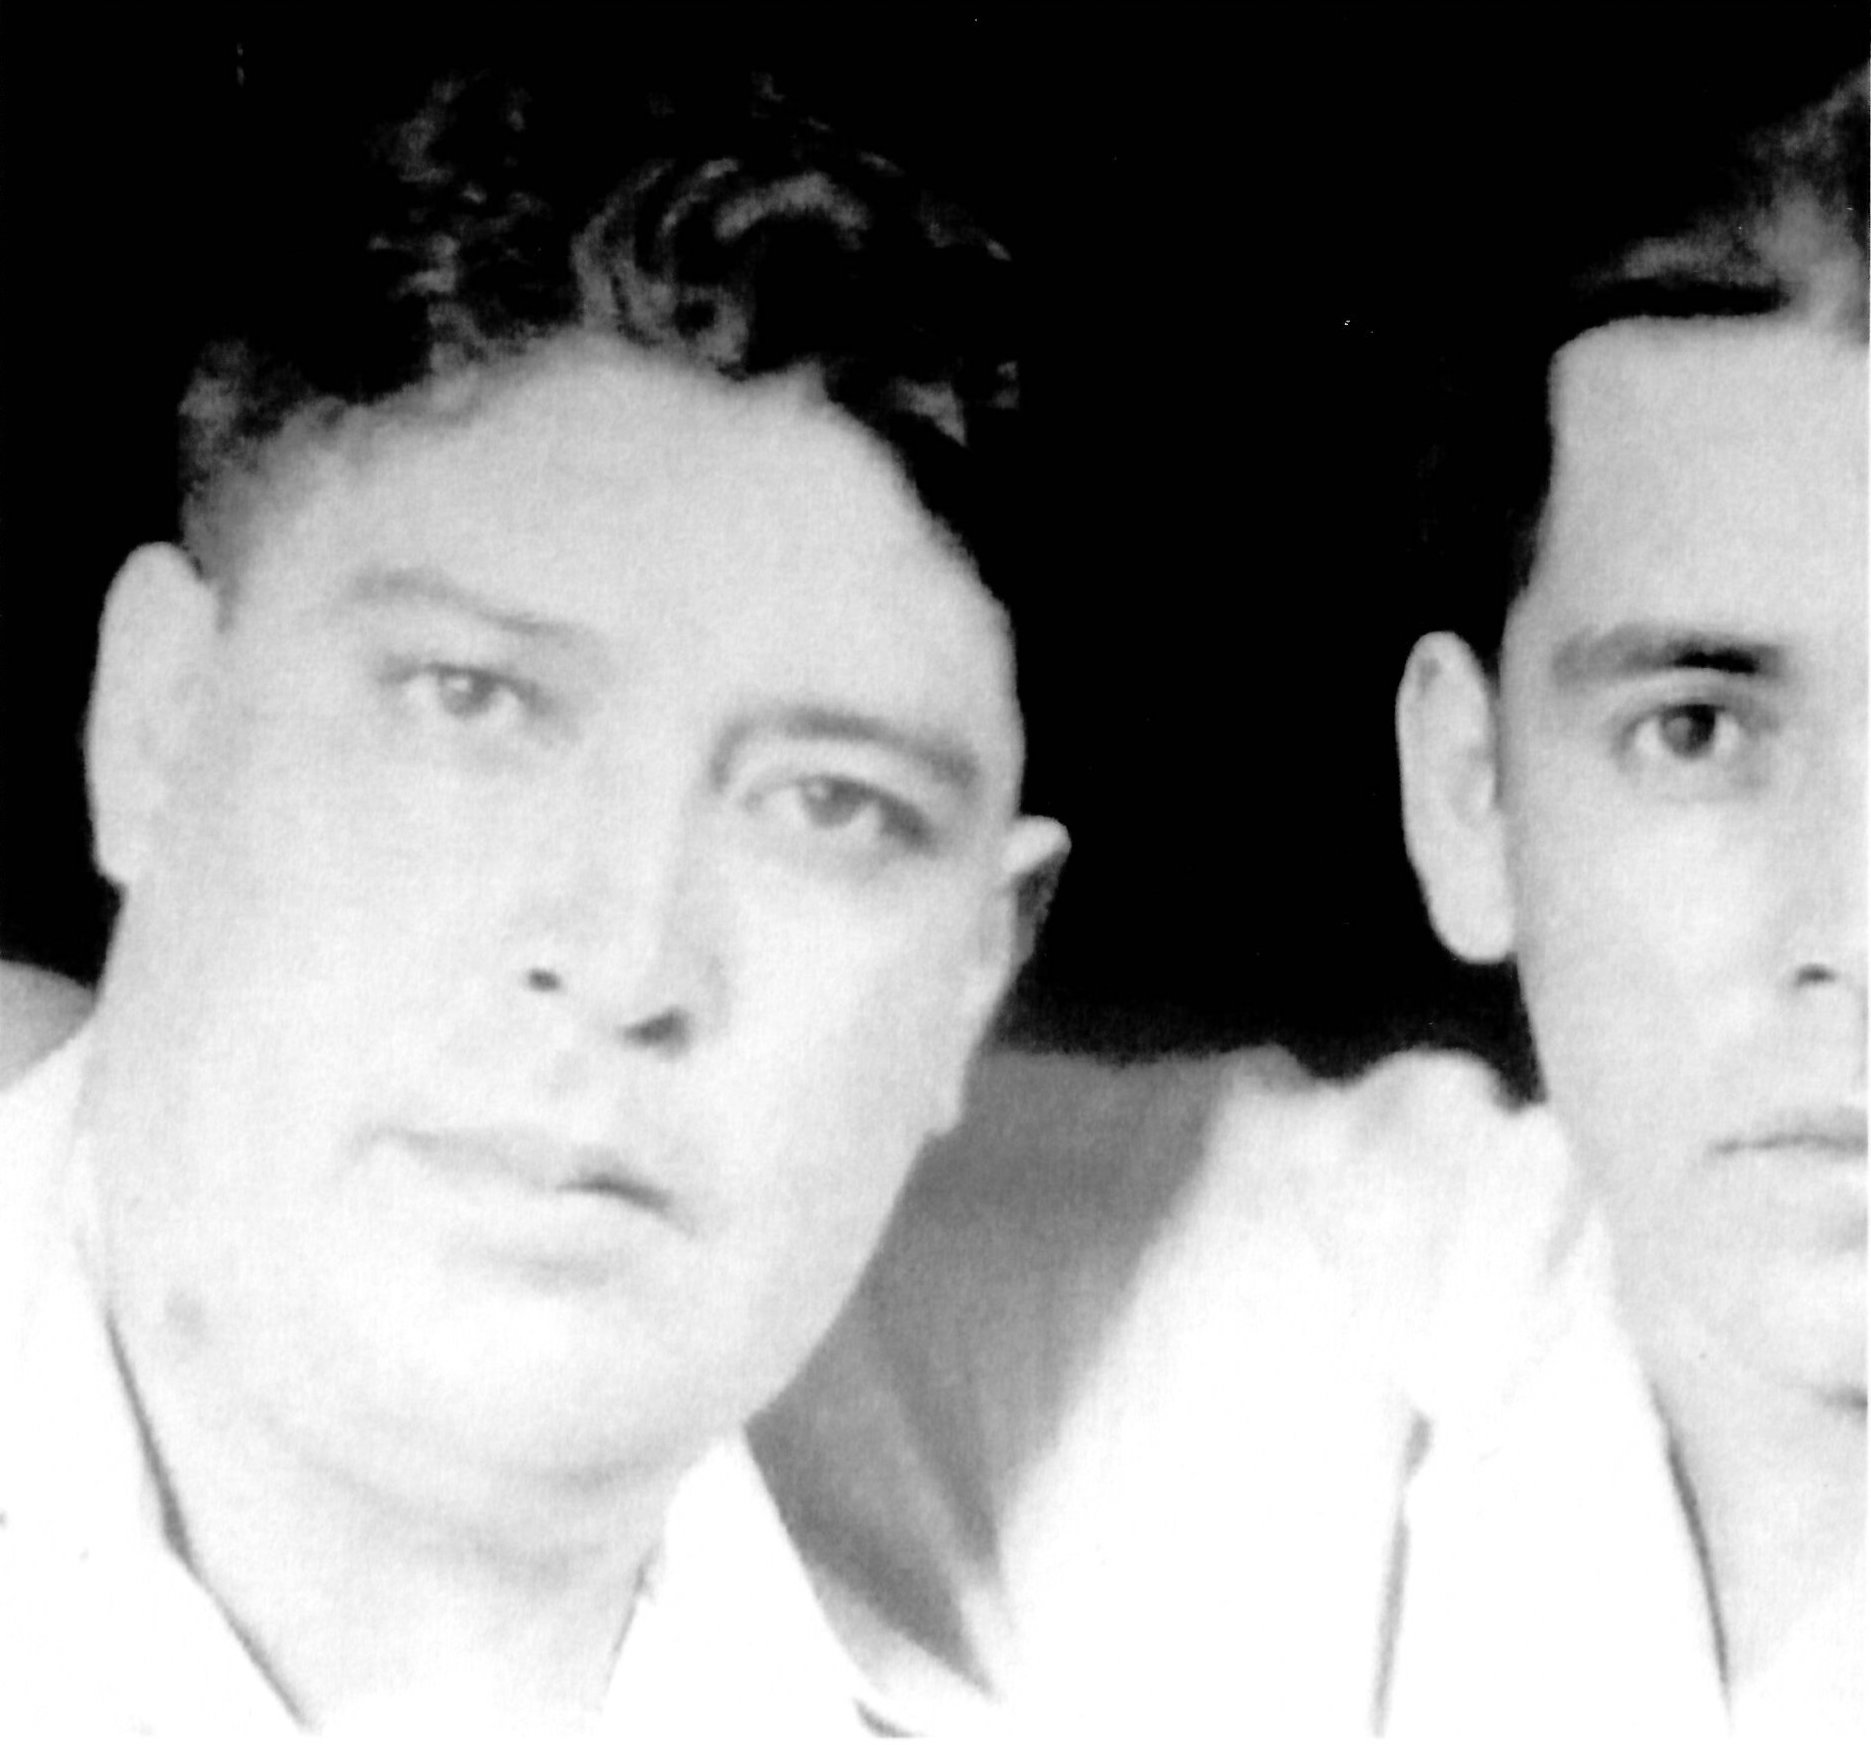 Photo of Marianne Diaz’s (L) father and (R) Uncle Joe (Tio Jose). This was taken when her Father and Tio Jose were in their prime. They played Mexican music at parties and performed in public.